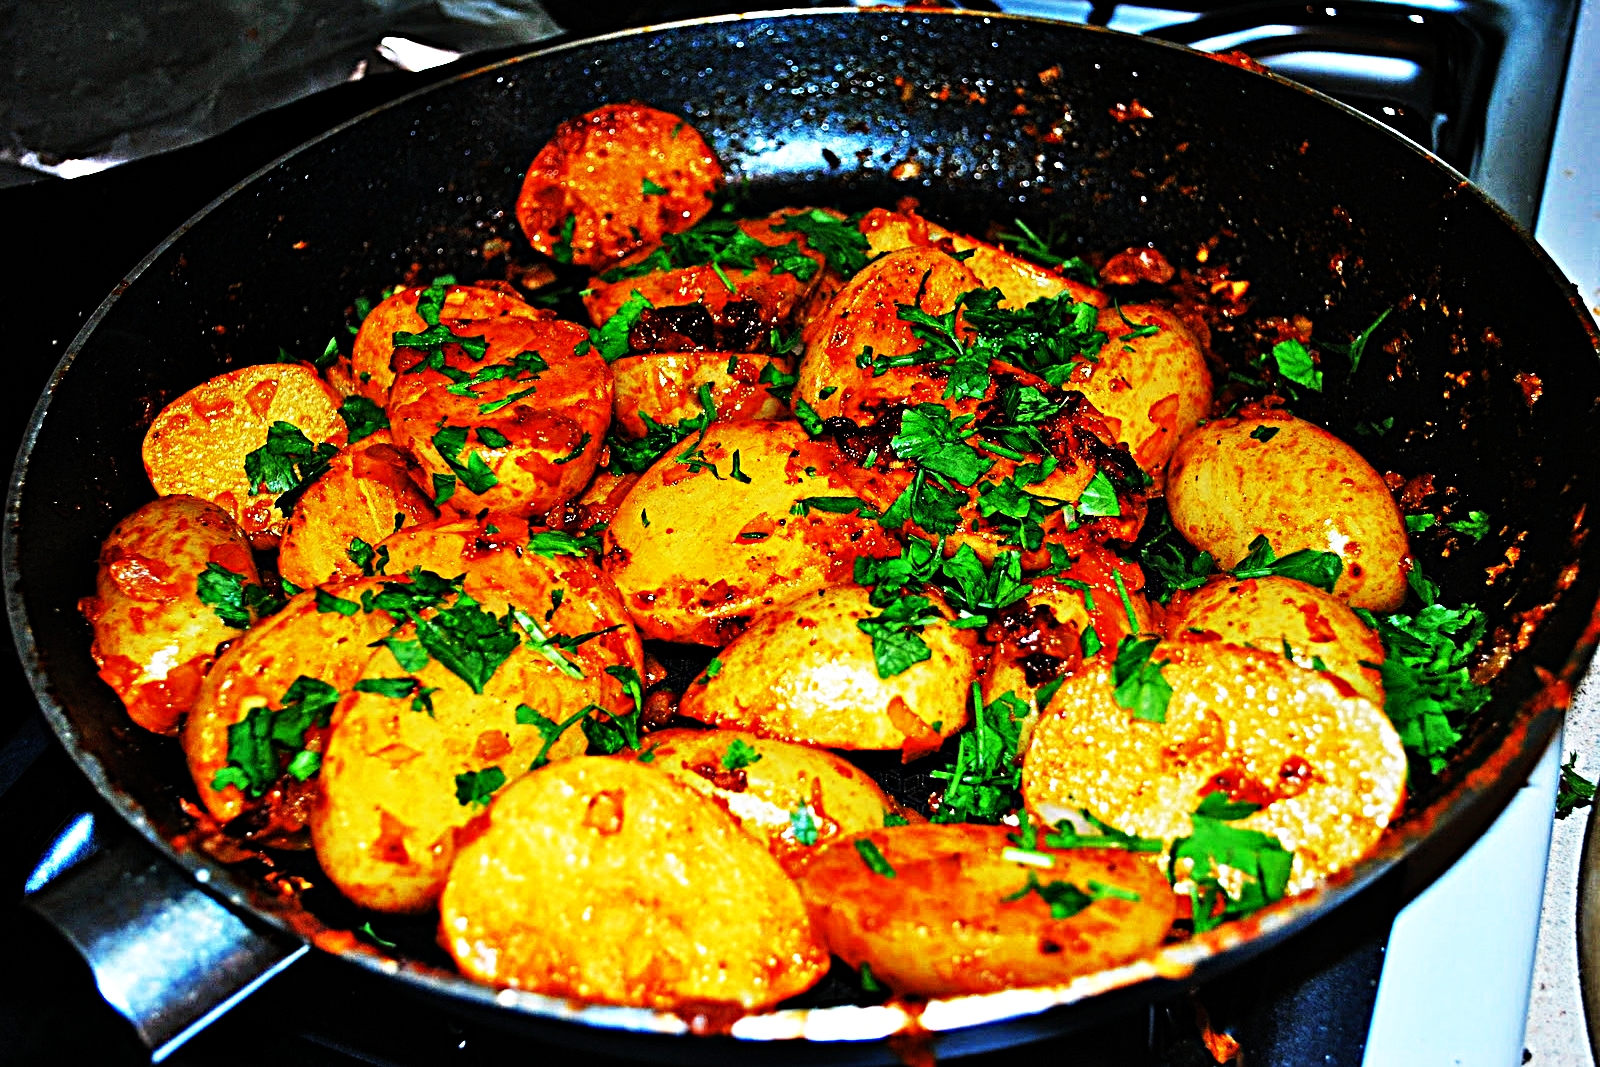 Stupid-Easy Recipe for German-style Potatoes (#1 Top-Rated)